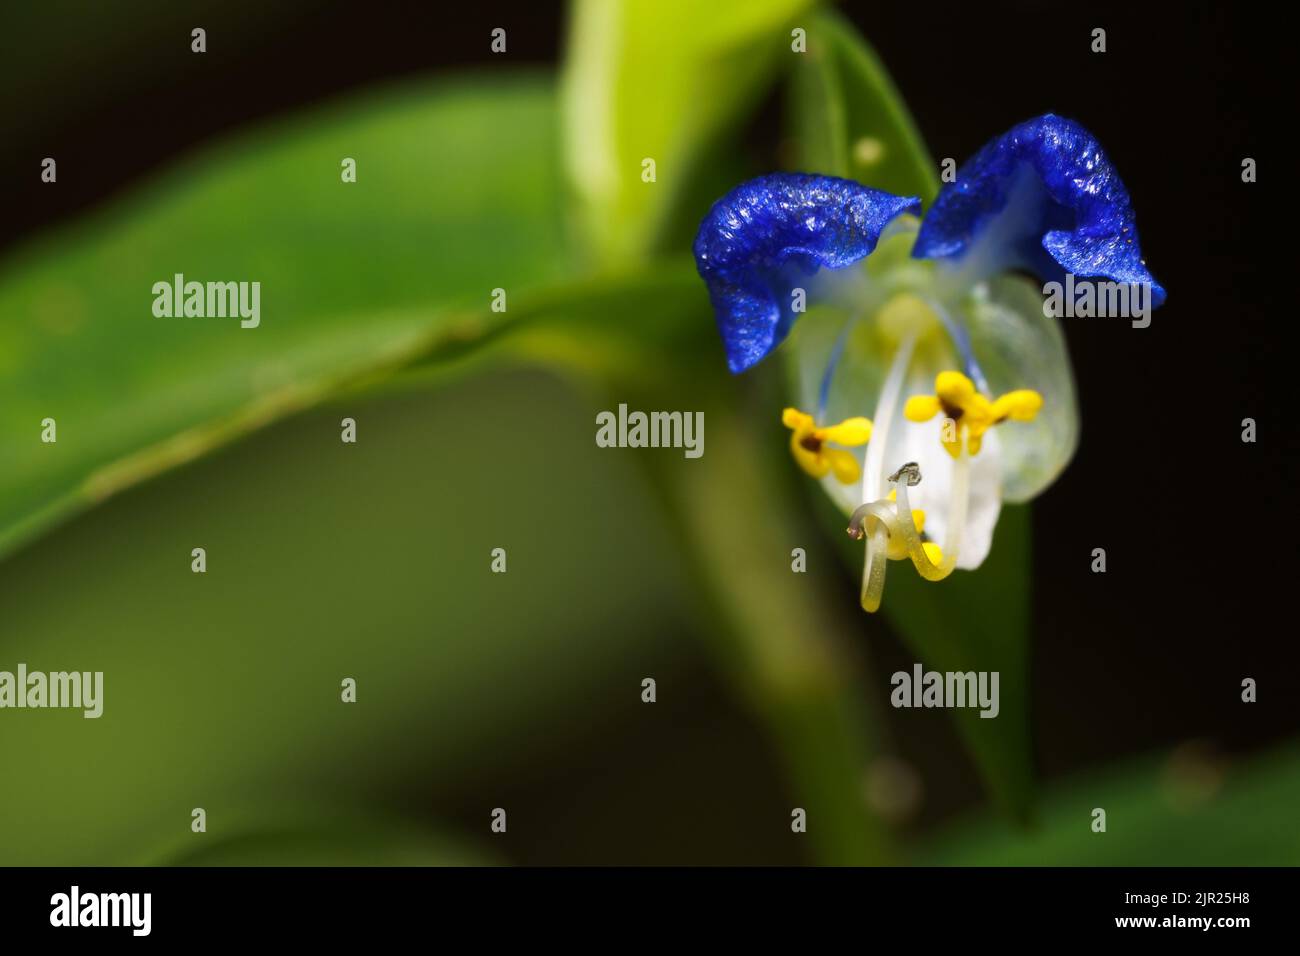 Commelina communis (Asiatic dayflower) is an annual plant that blooms in summer with two light blue petals and one small white petal underneath. Stock Photo